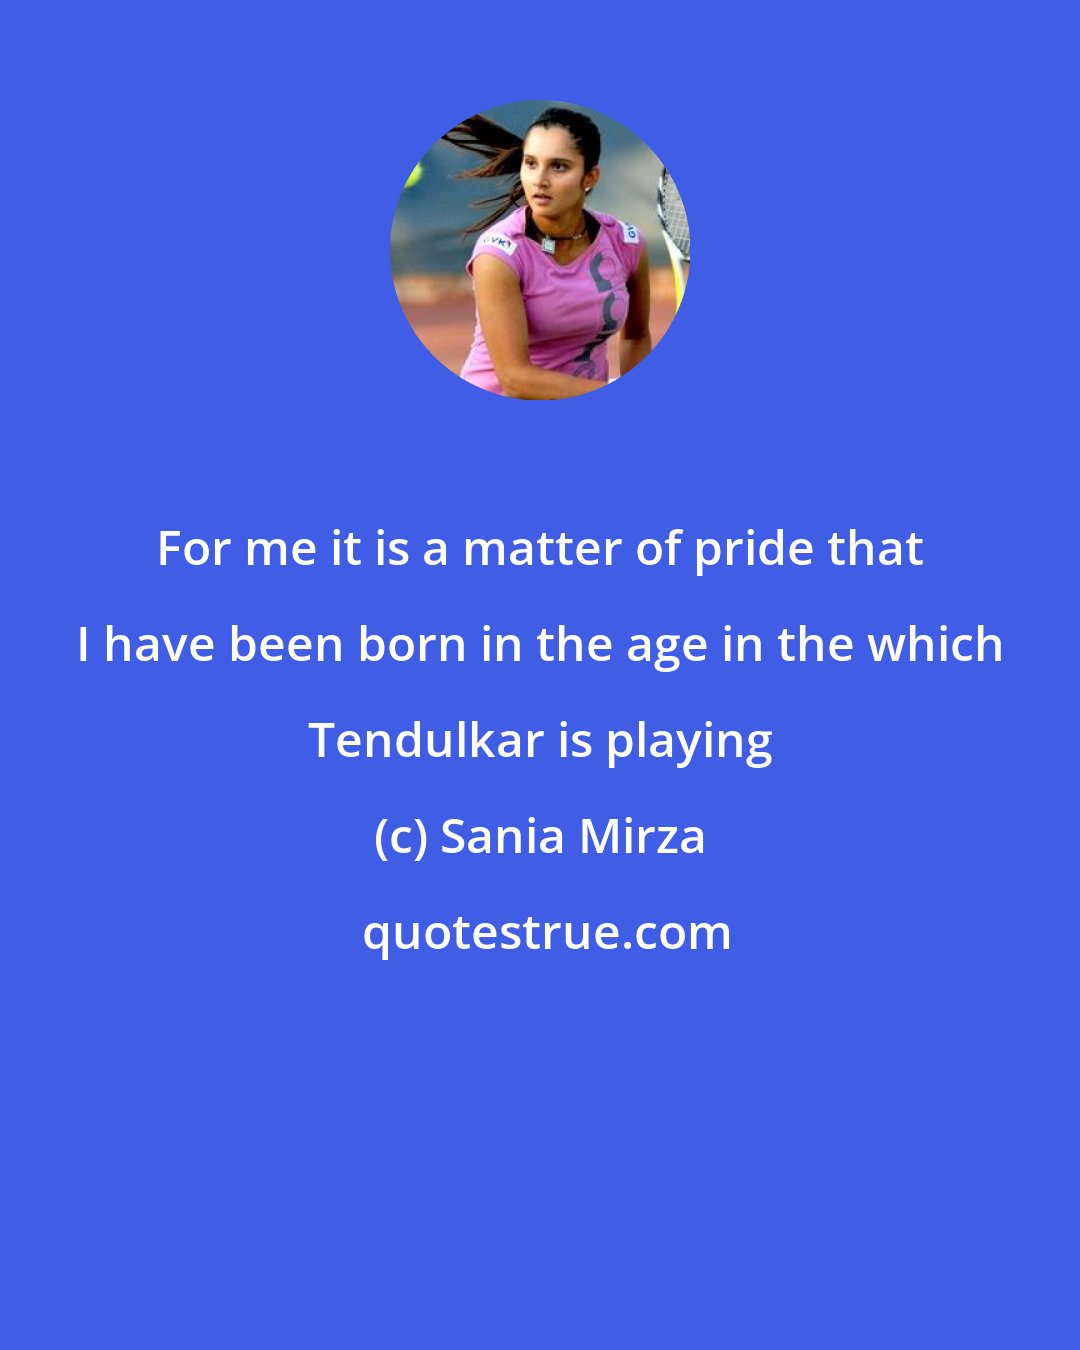 Sania Mirza: For me it is a matter of pride that I have been born in the age in the which Tendulkar is playing